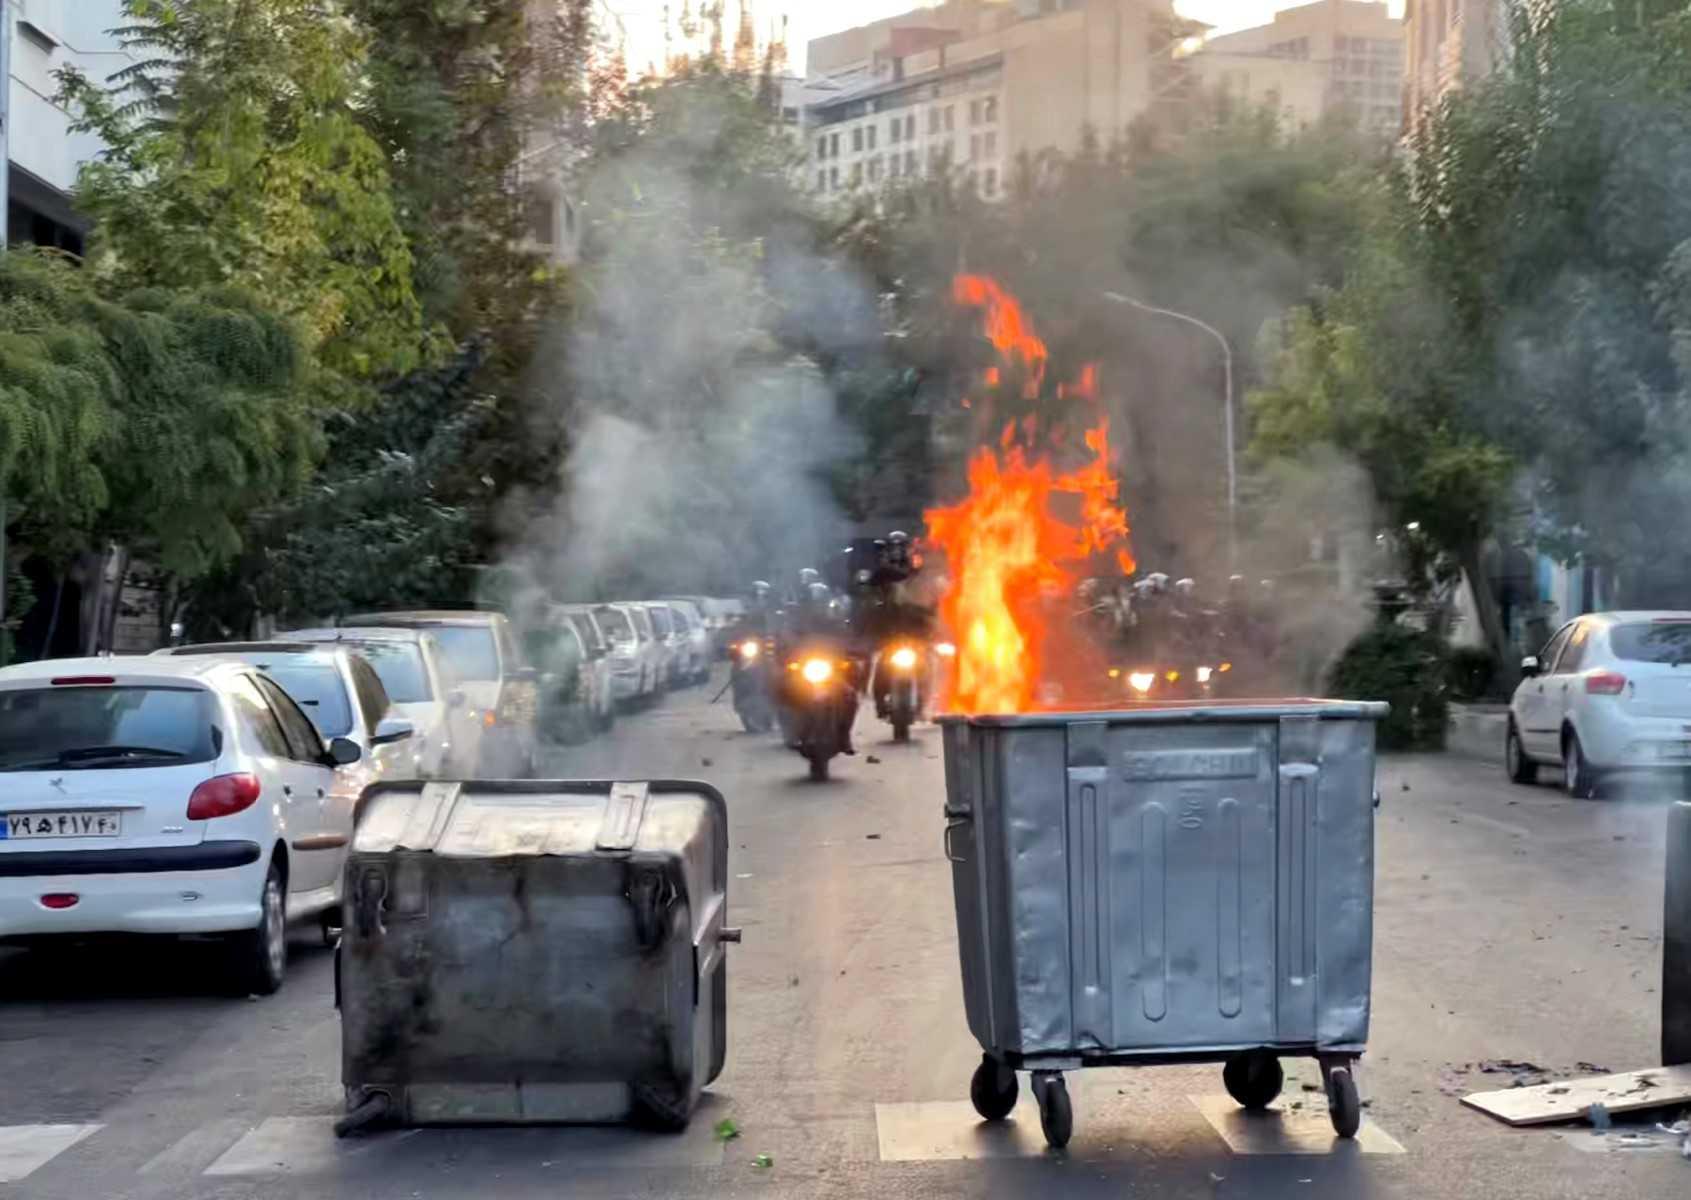 A picture obtained by AFP outside Iran shows a bin burning in the middle of an intersection during a protest for Mahsa Amini, a woman who died after being arrested by the Islamic republic's 'morality police, in Tehran on Sept 20. Photo: AFP